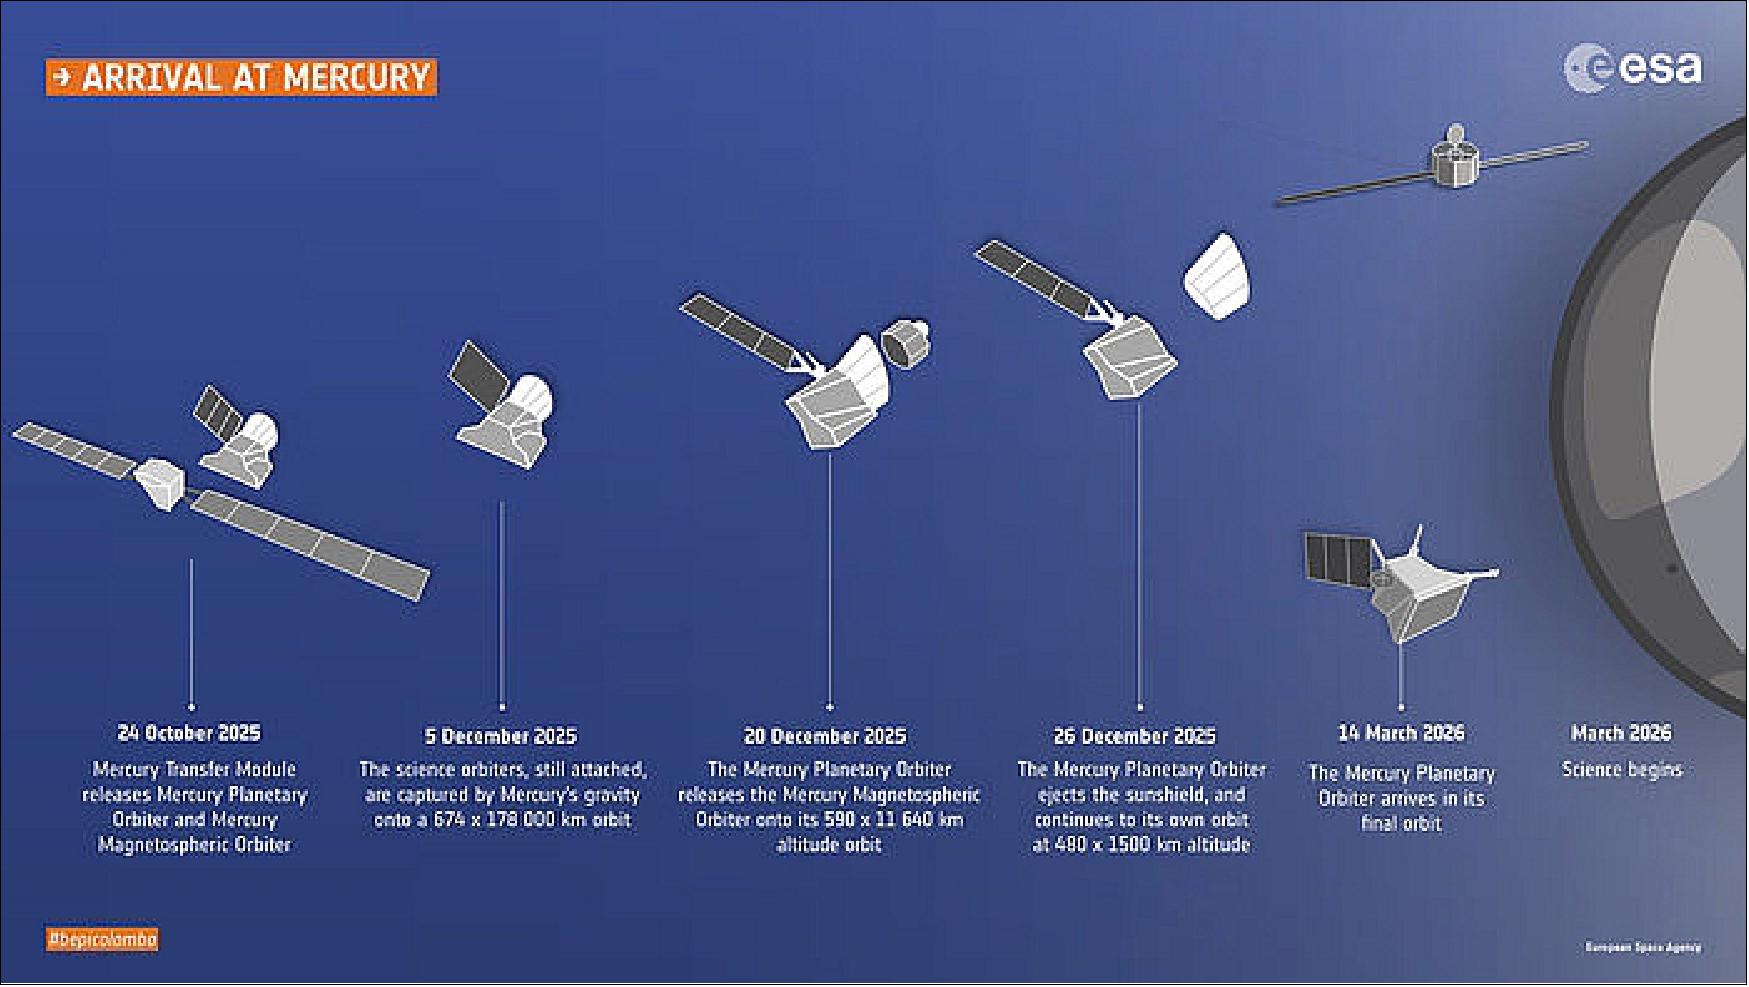 Figure 57: After a seven year journey through the inner Solar System, BepiColombo will arrive at Mercury. While still on the approach to Mercury, the transfer module will separate and the two science orbiters, still together, will be captured into a polar orbit around the planet. Their altitude will be adjusted using MPO’s thrusters until MMO’s desired elliptical polar orbit is reached. Then MPO will separate and descend to its own orbit using its thrusters. The fine-tuning of the orbits is then expected to take three months, after which, the main science mission will begin (image credit: ESA, Ref. 52)